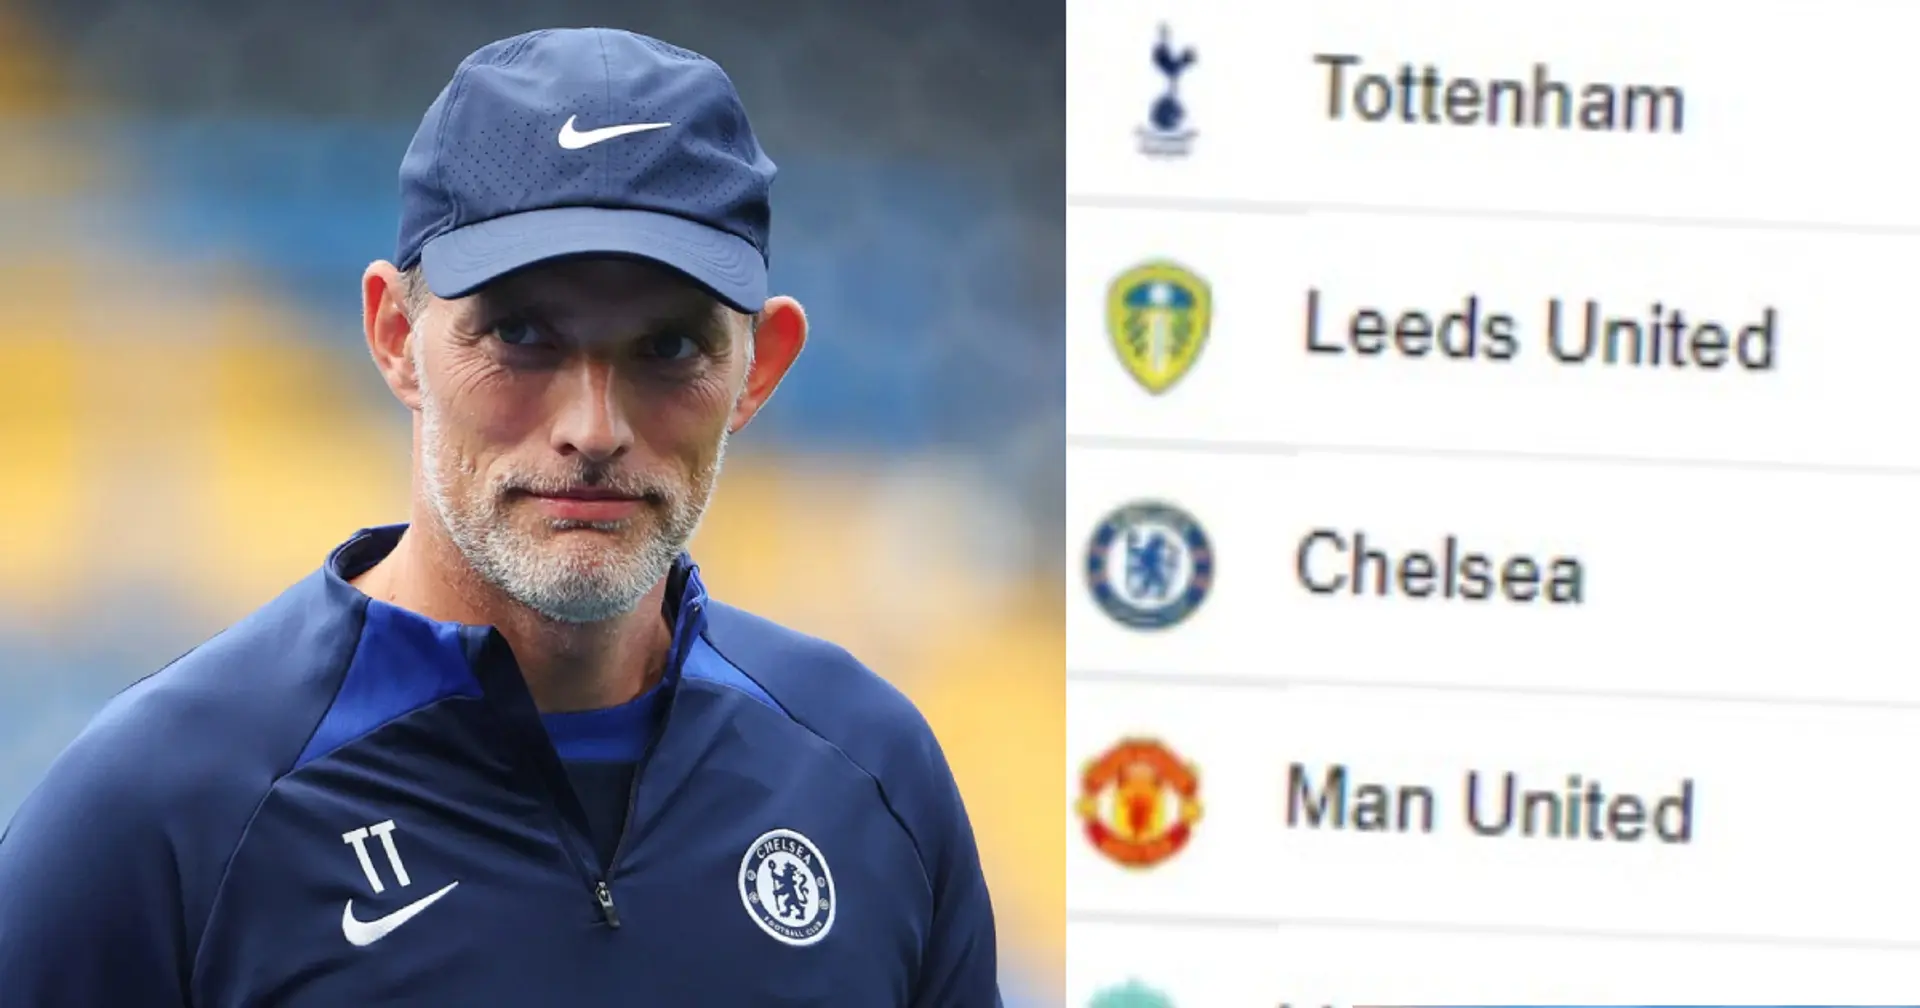 Chelsea jump into top 6: updated Premier League table after Saturday games